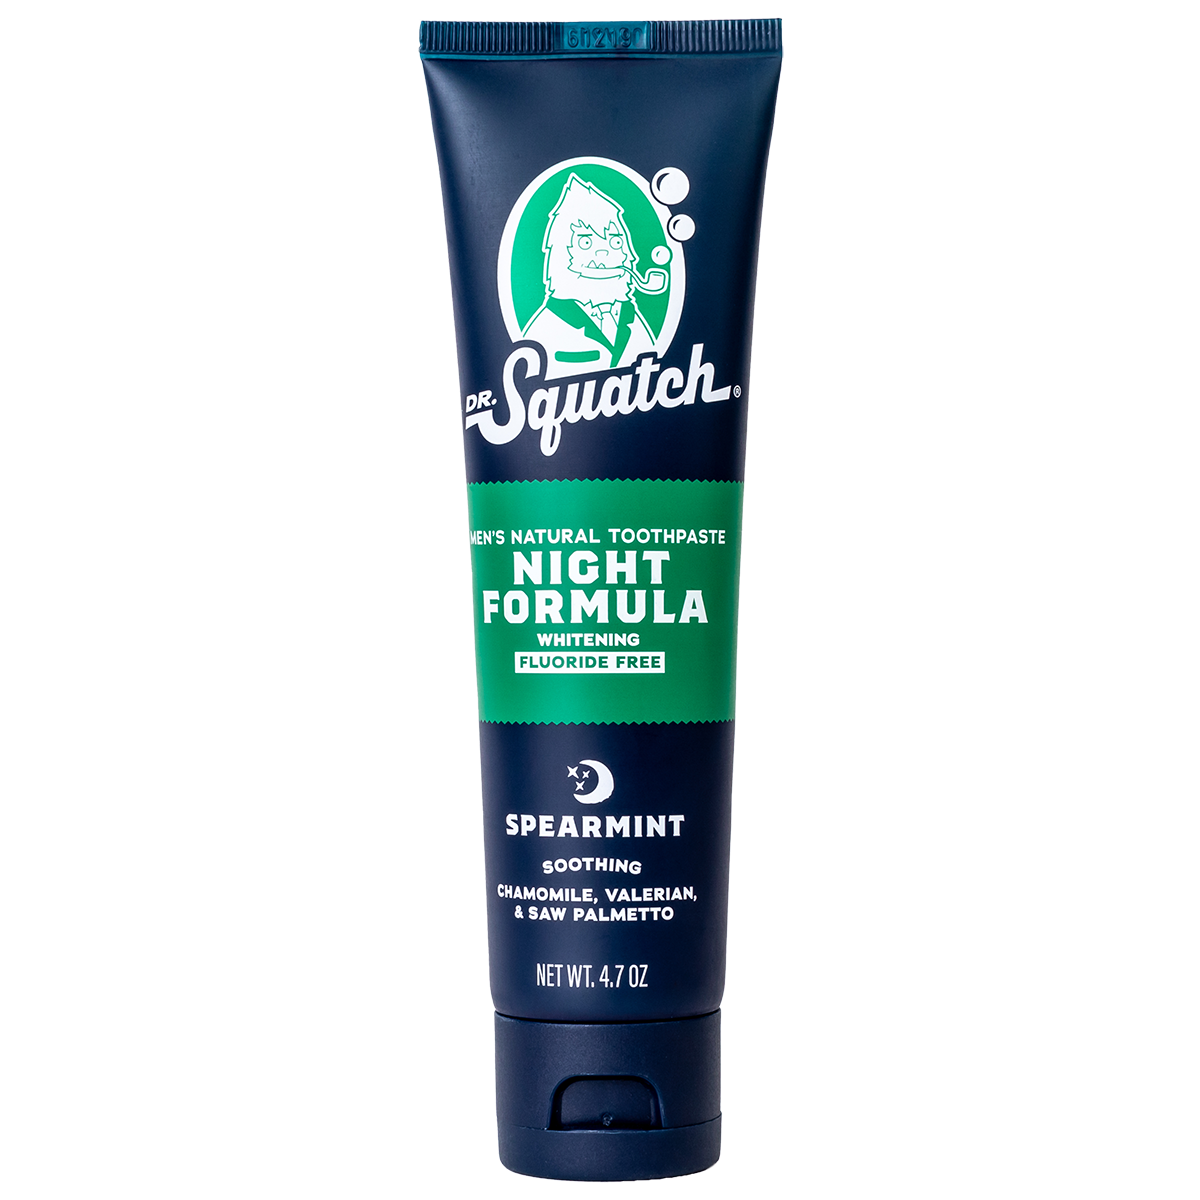 Dr. Squatch Night Toothpaste